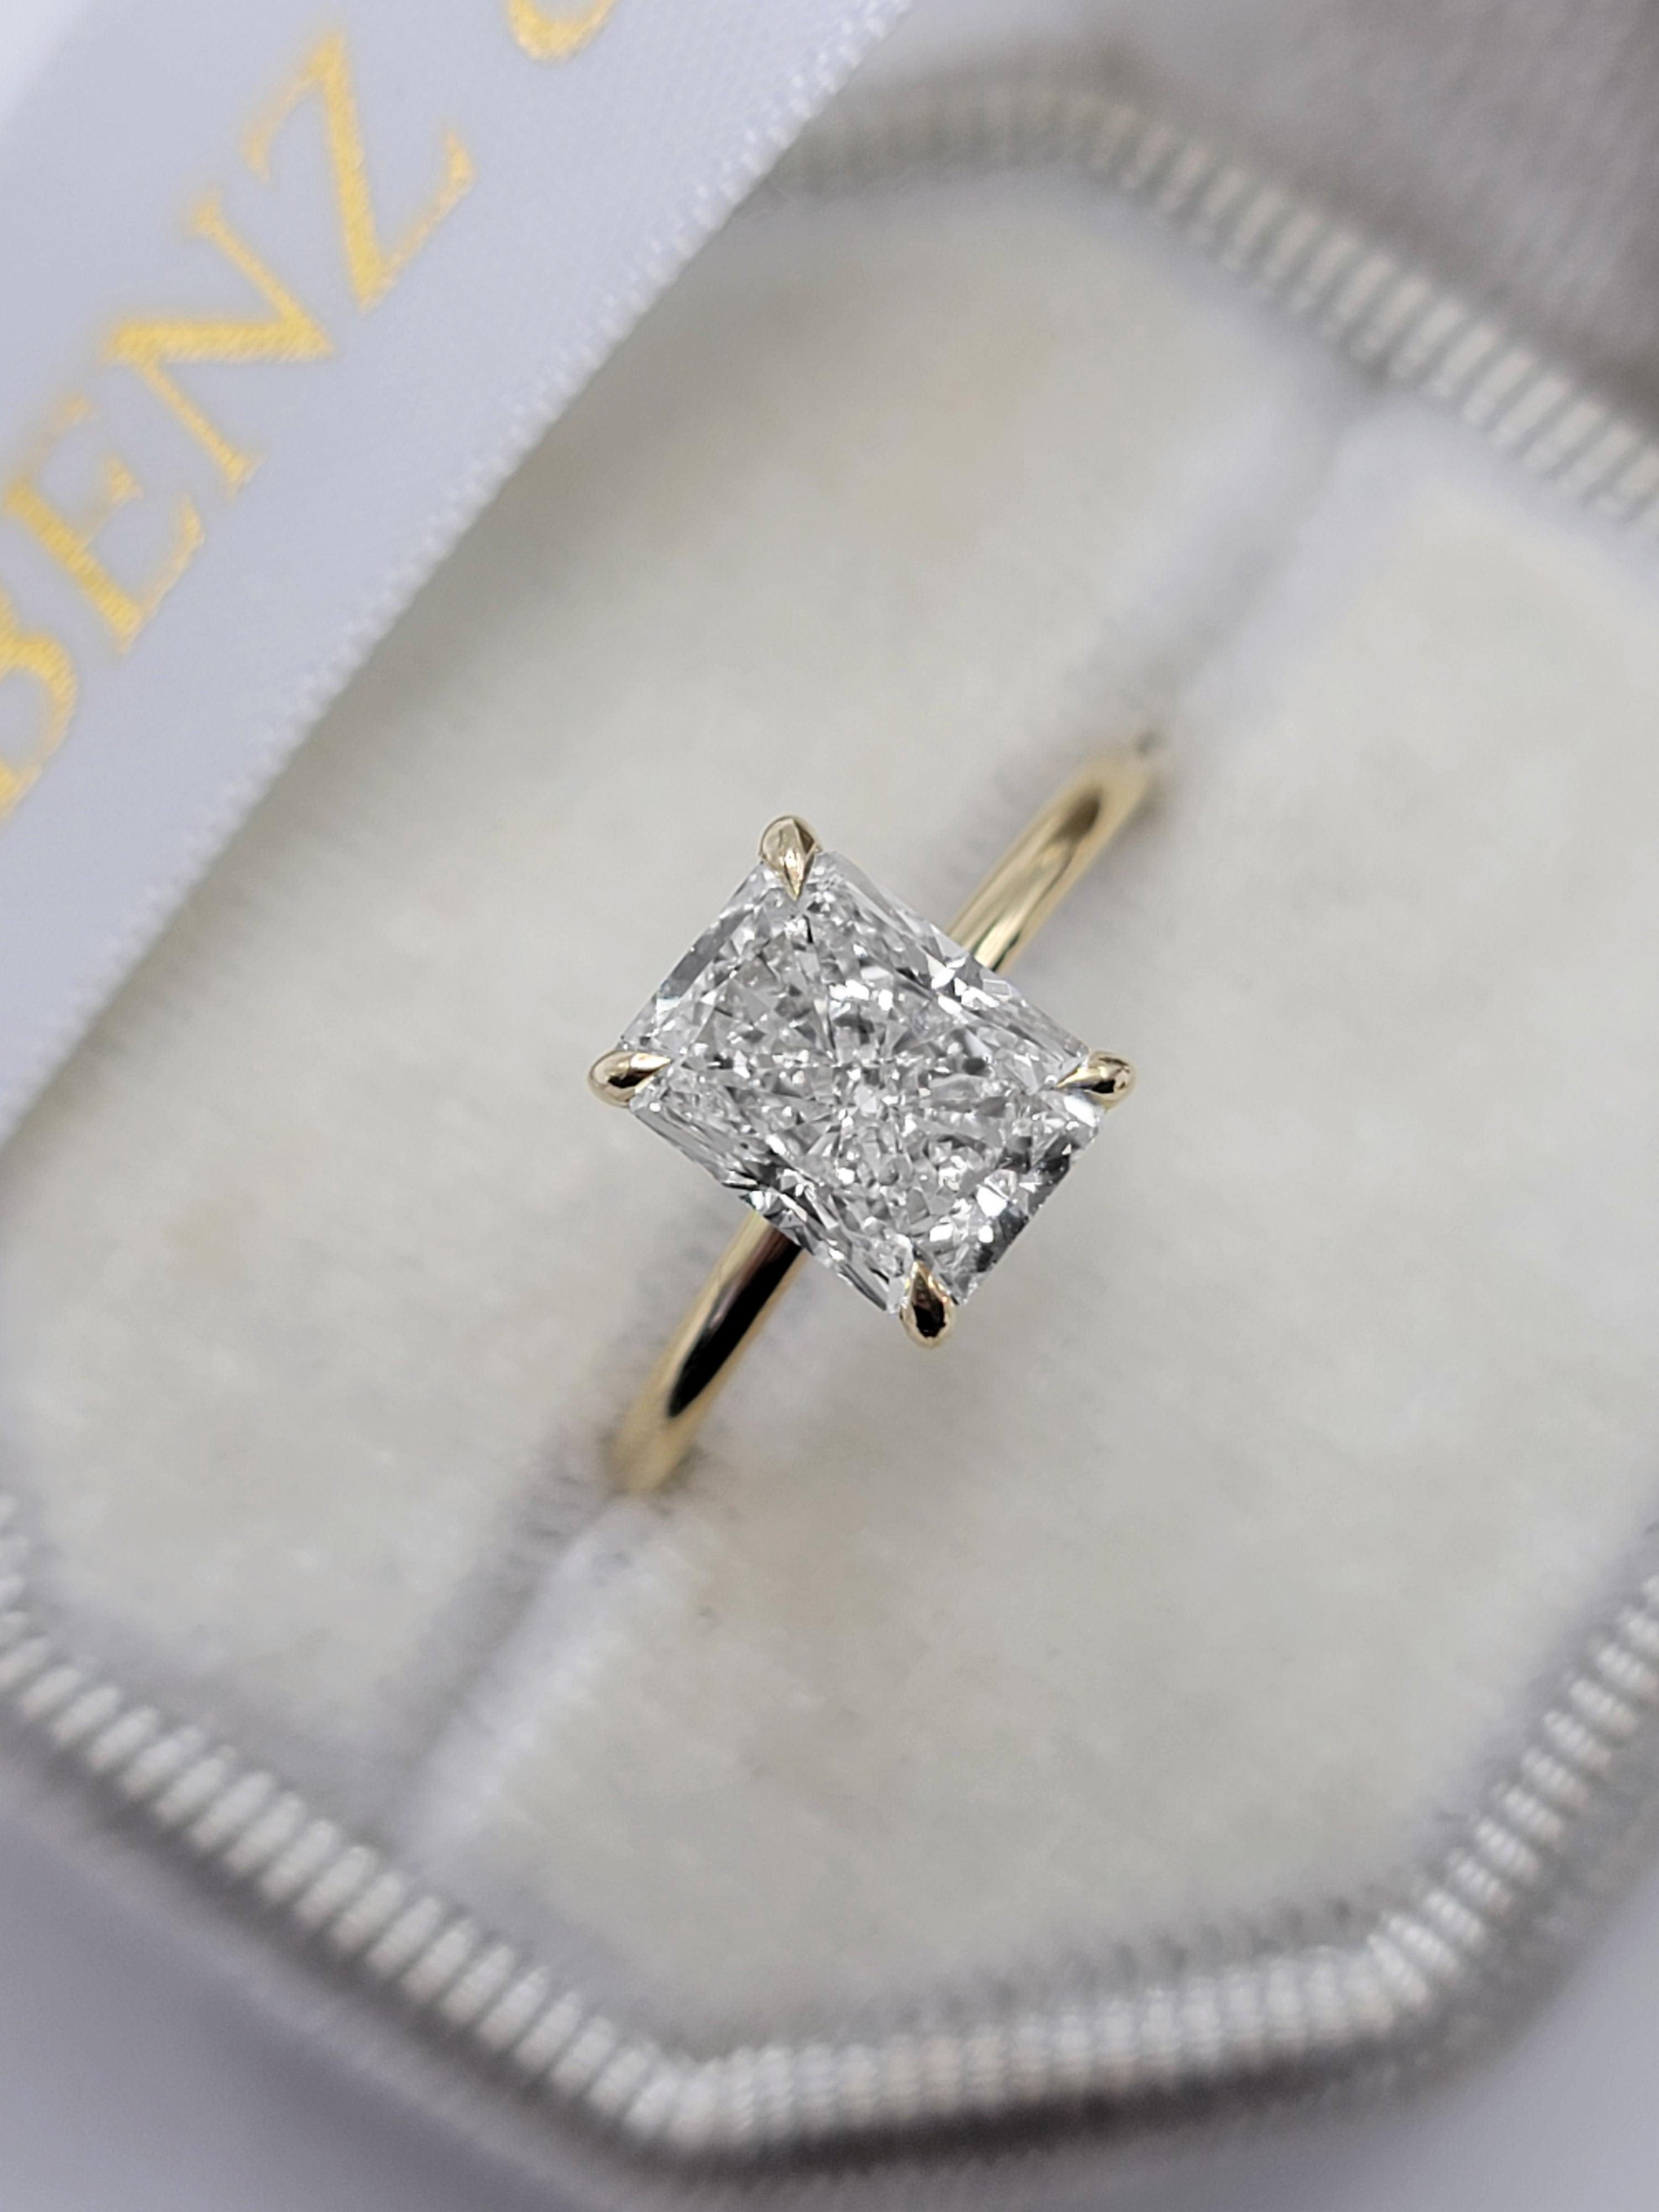 2 Carat Natural Diamond Solitaire Radiant Cut Engagement Ring in 14K White  Gold